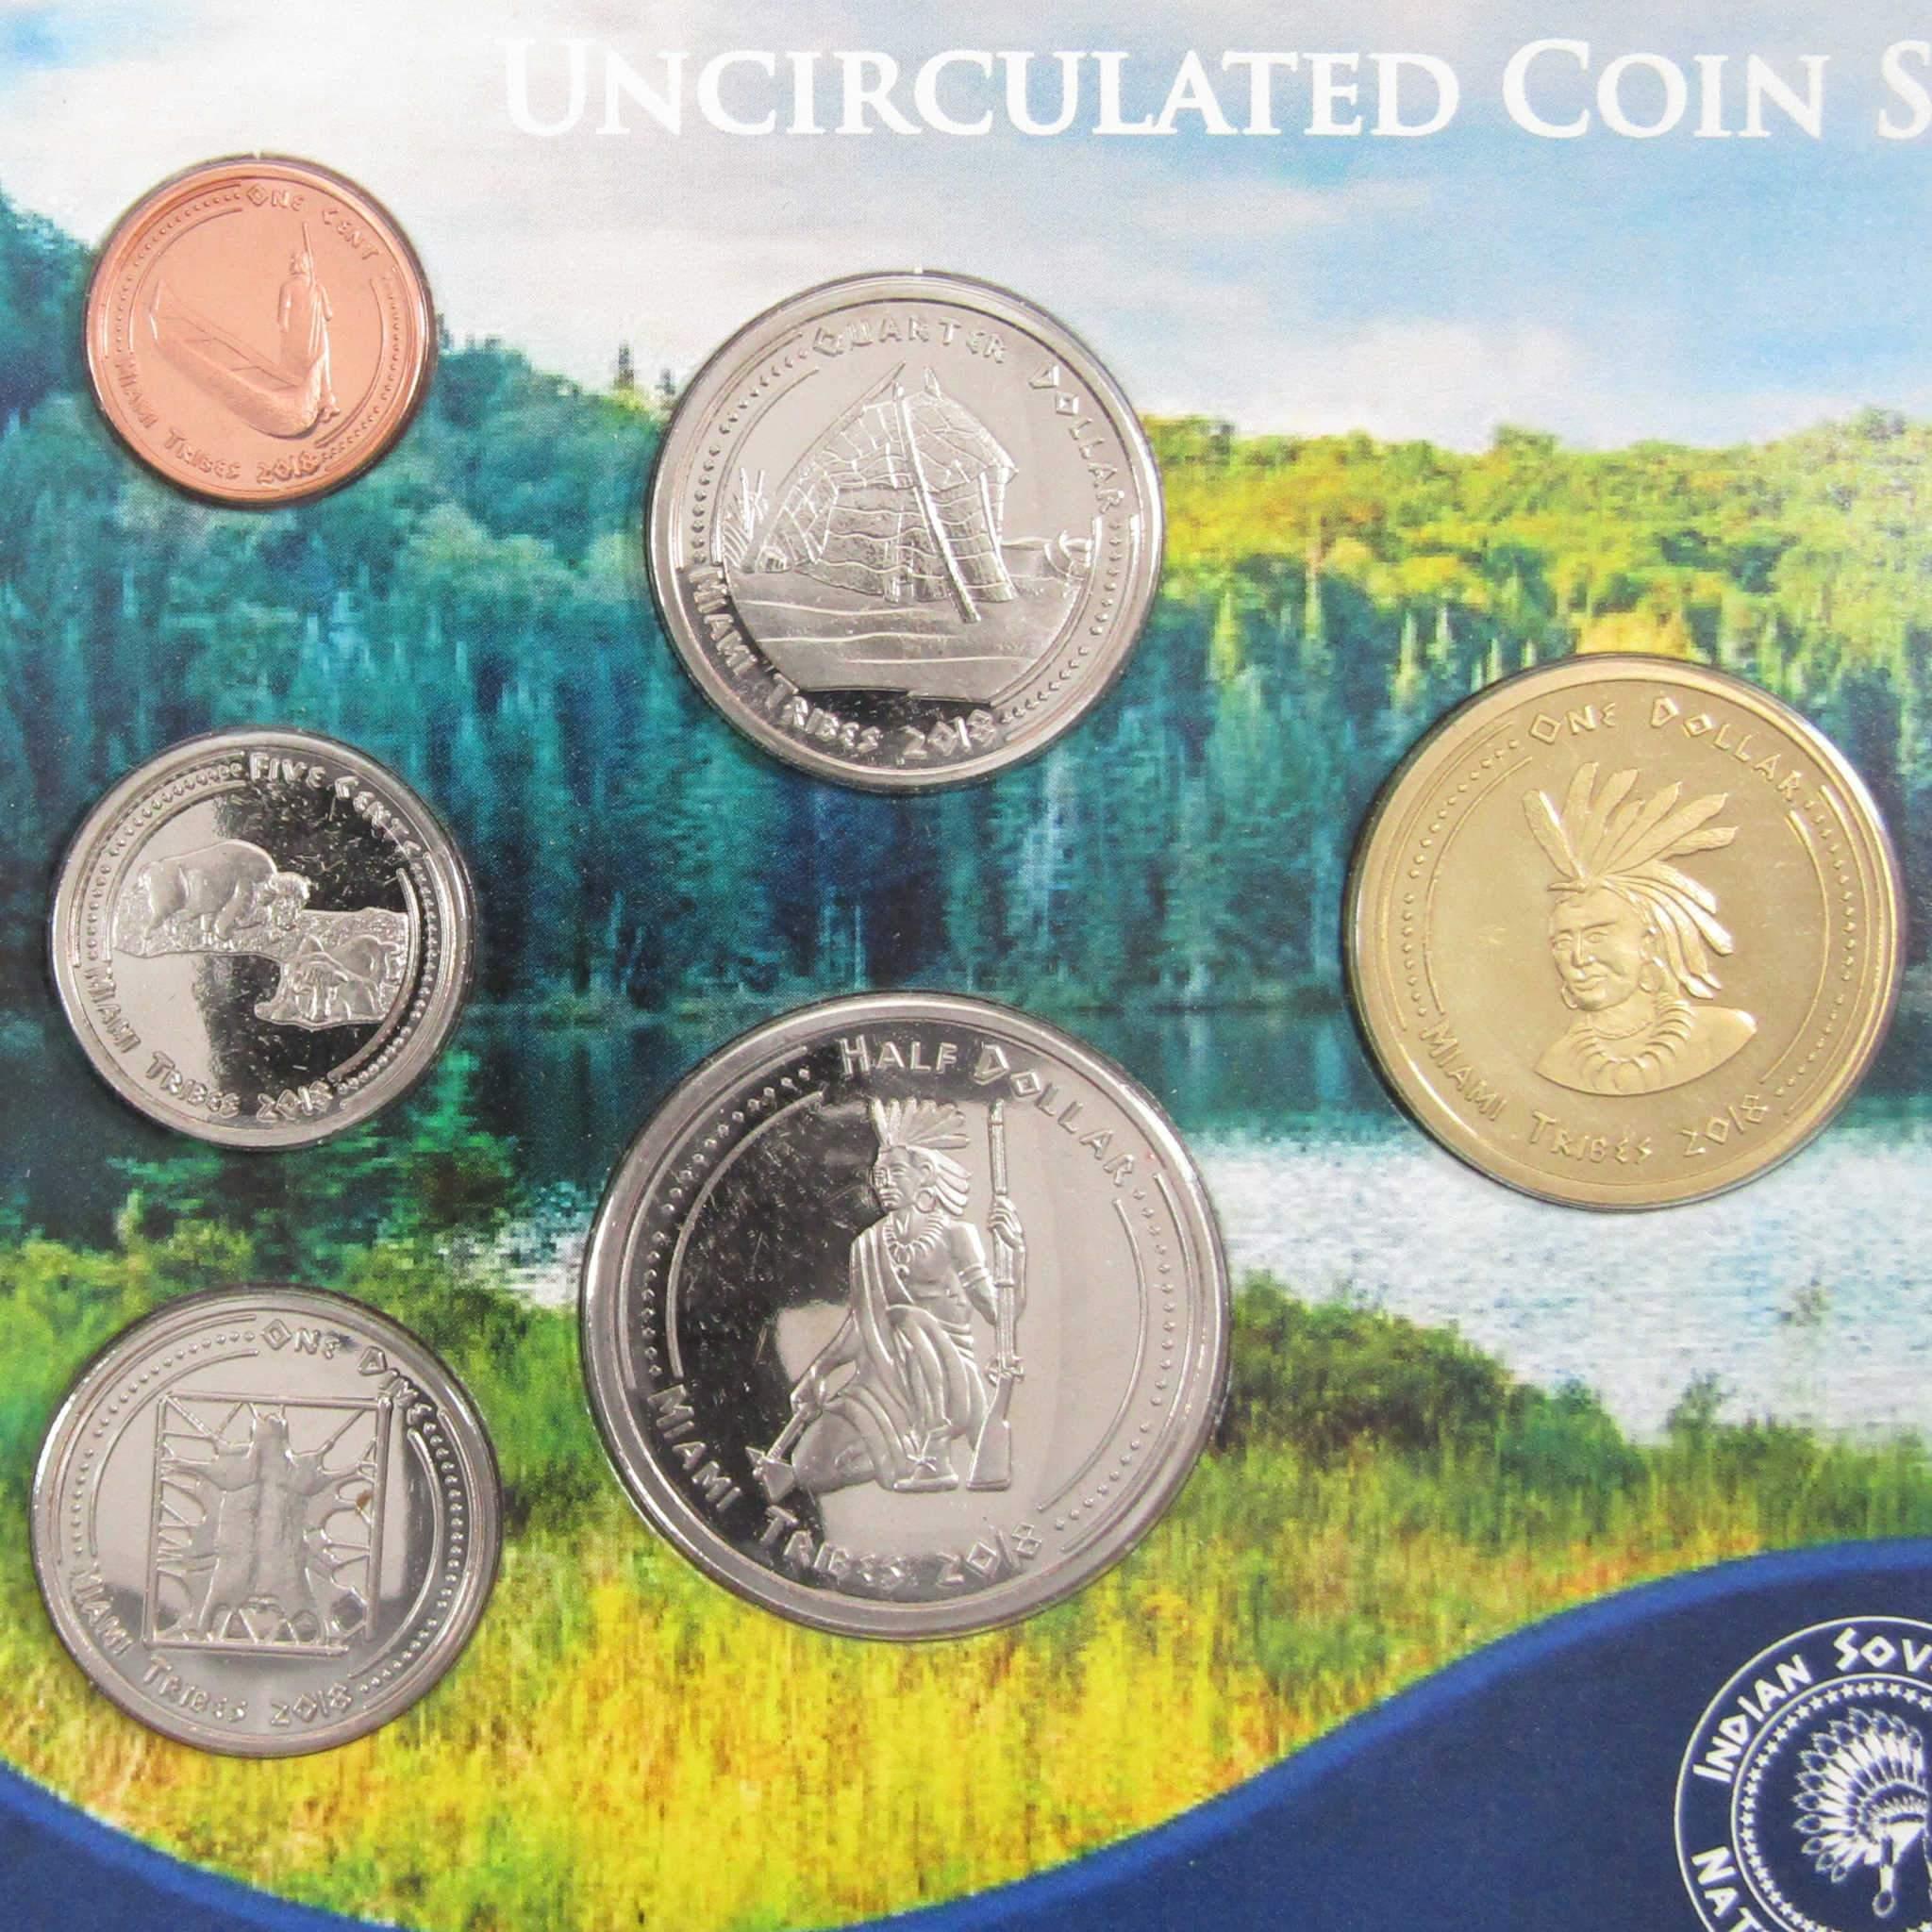 2018 Jamul Native American Miami Sovereign Nation Uncirculated Set Collectible